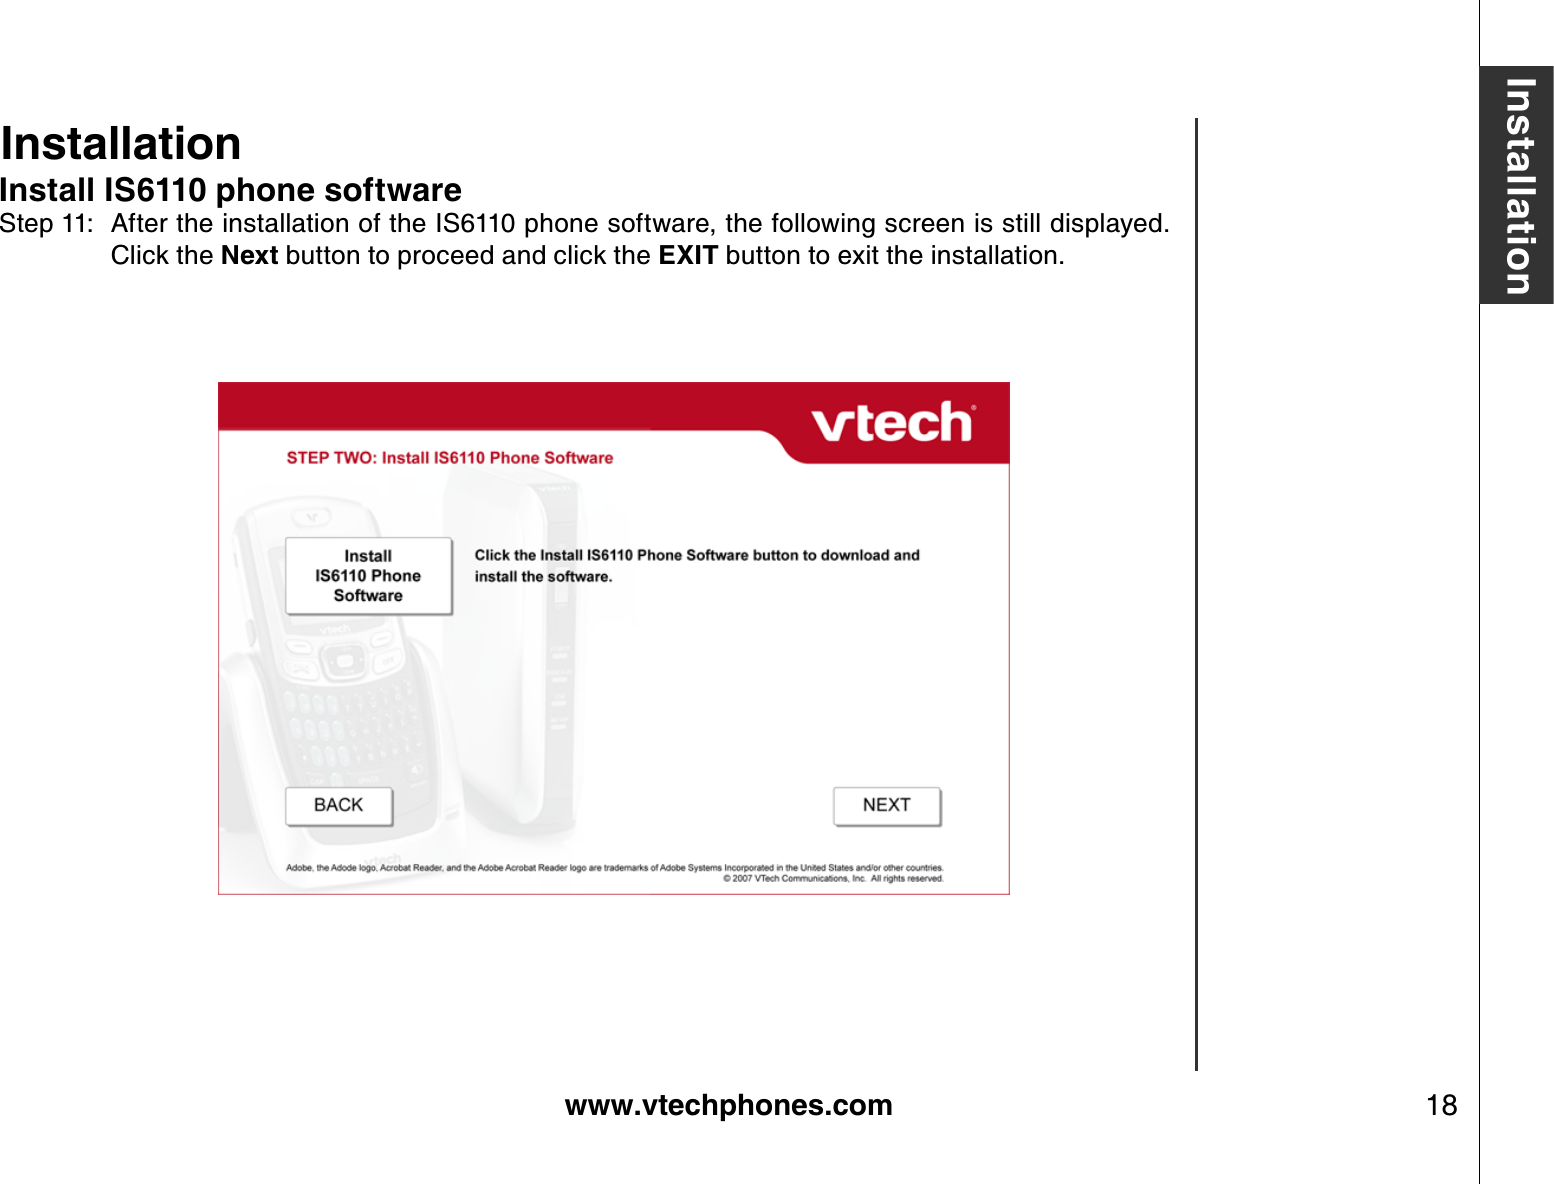 www.vtechphones.com 18InstallationInstallationInstall IS6110 phone softwareStep 11: After the installation of the IS6110 phone software, the following screen is still displayed.  Click the Next button to proceed and click the EXIT button to exit the installation.                   